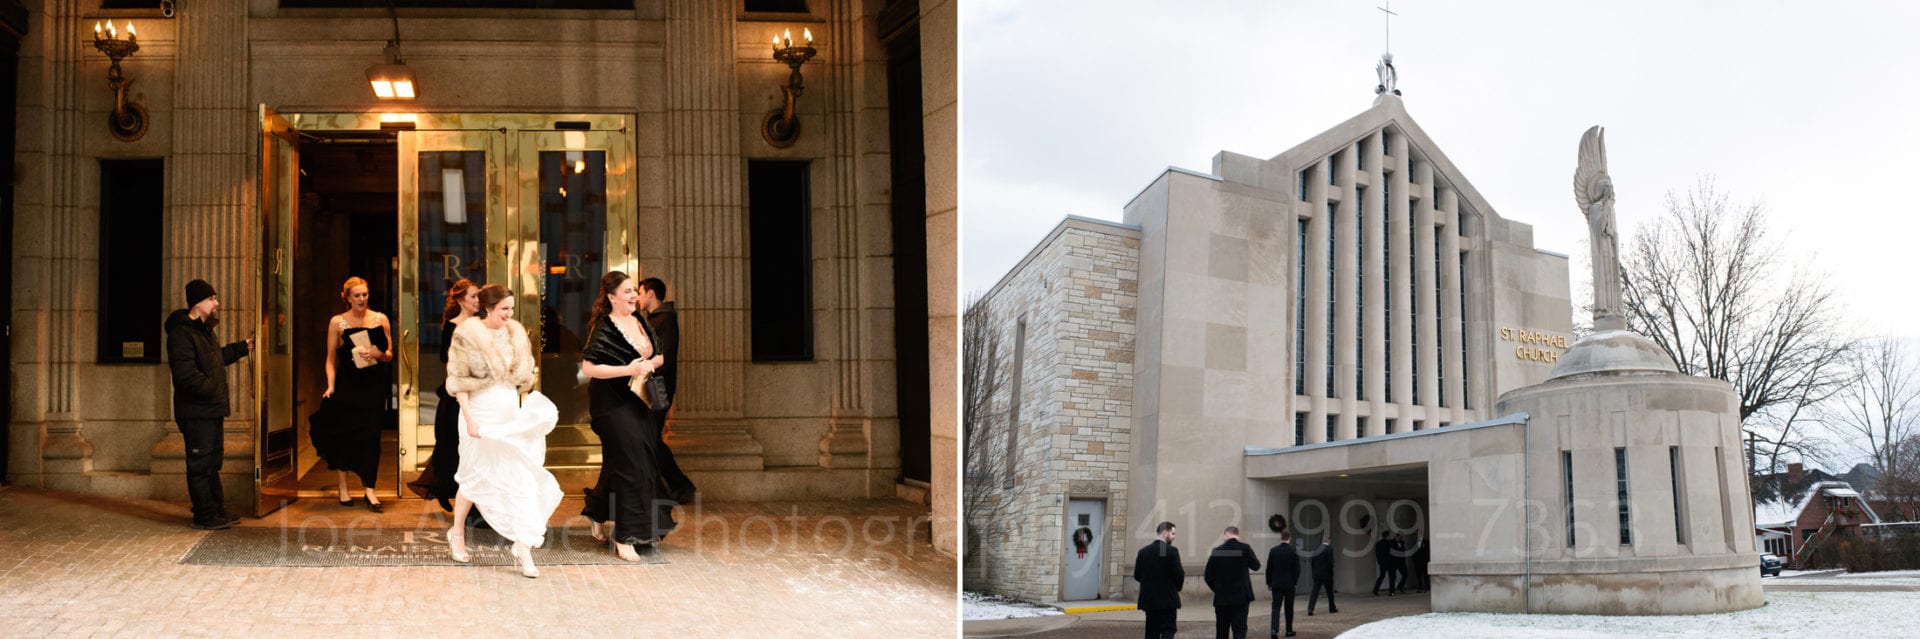 Two photos: A bride wearing a white dress and a fur stole walks out of the gold doors at the front of the Renaissance Hotel in Pittsburgh with her bridesmaids who wear black dresses. The second photo shows a tuxedo clad groom and his groomsmen walking into St. Raphael church in Stanton Heights.